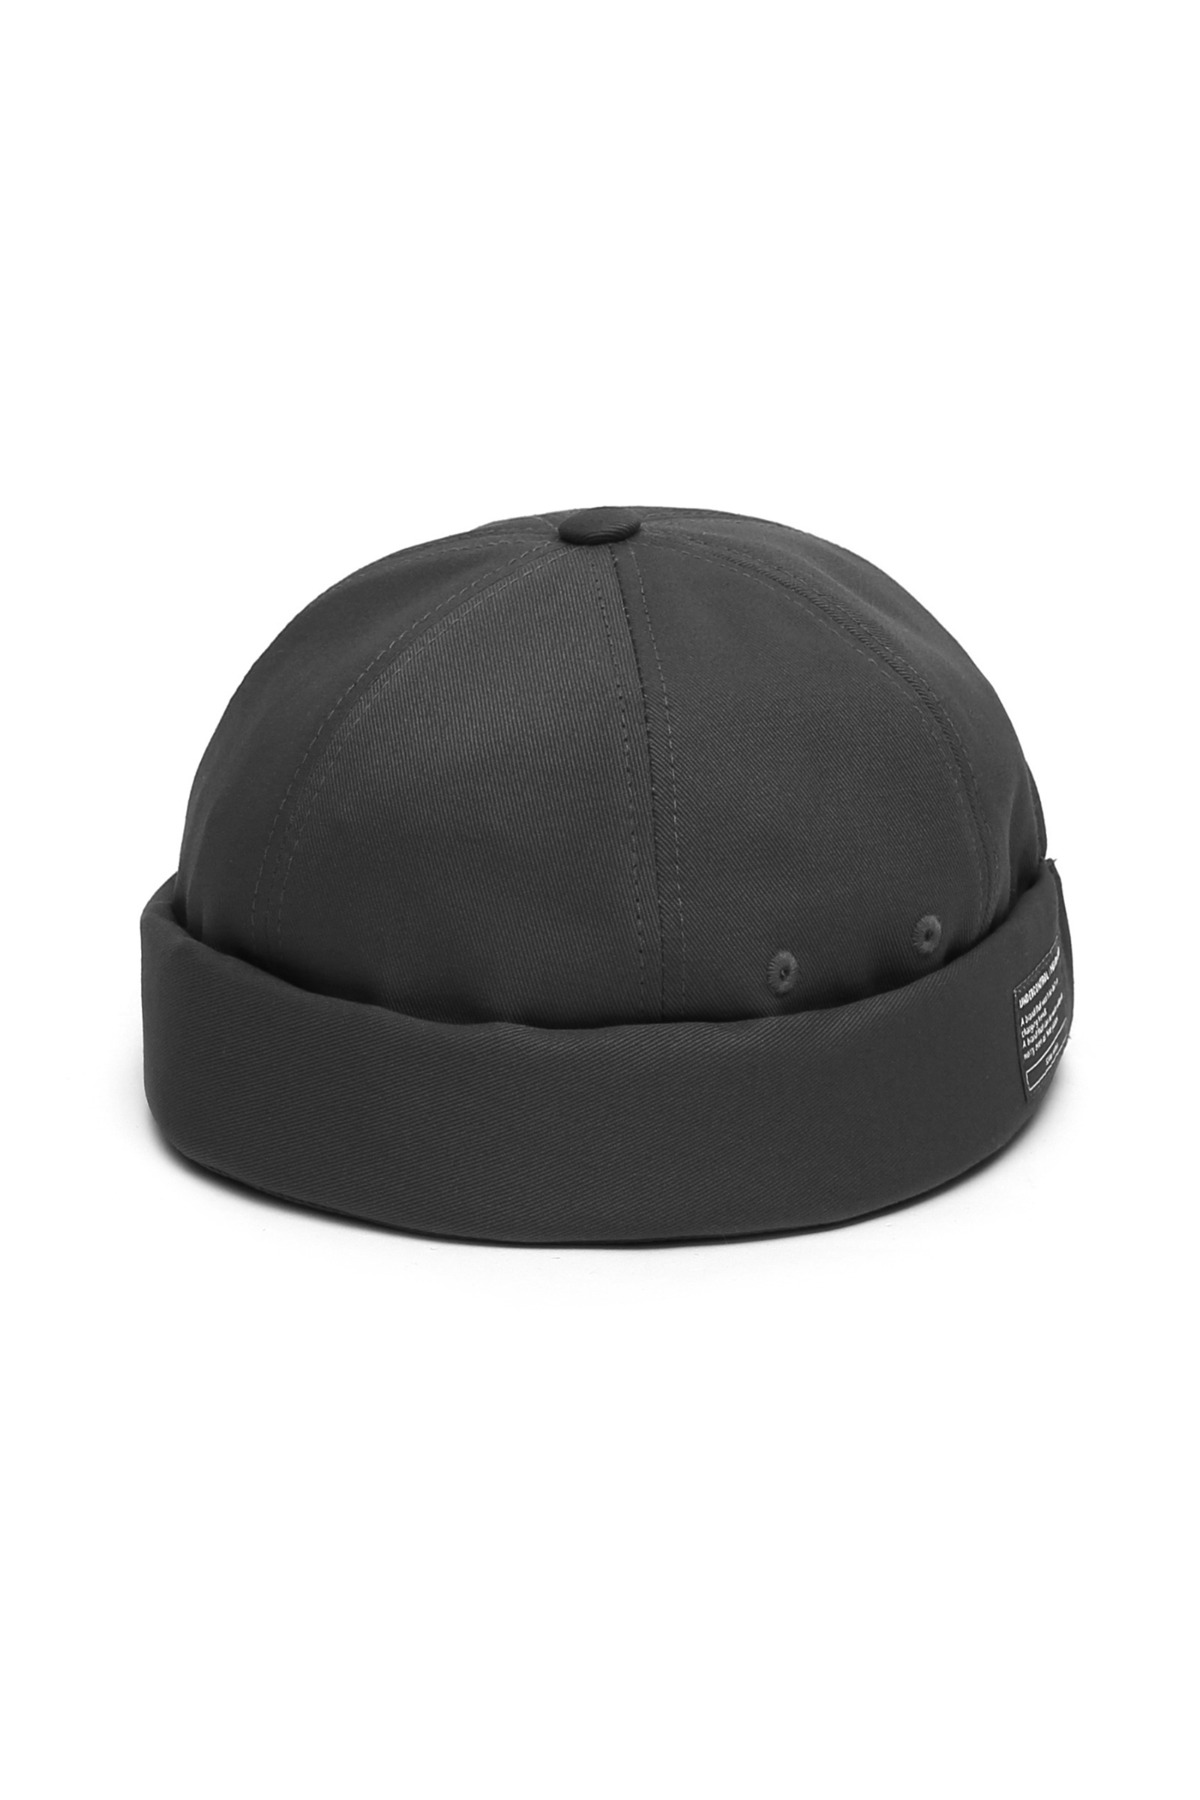 MOLD CAP / TWILL COTTON / CHARCOAL